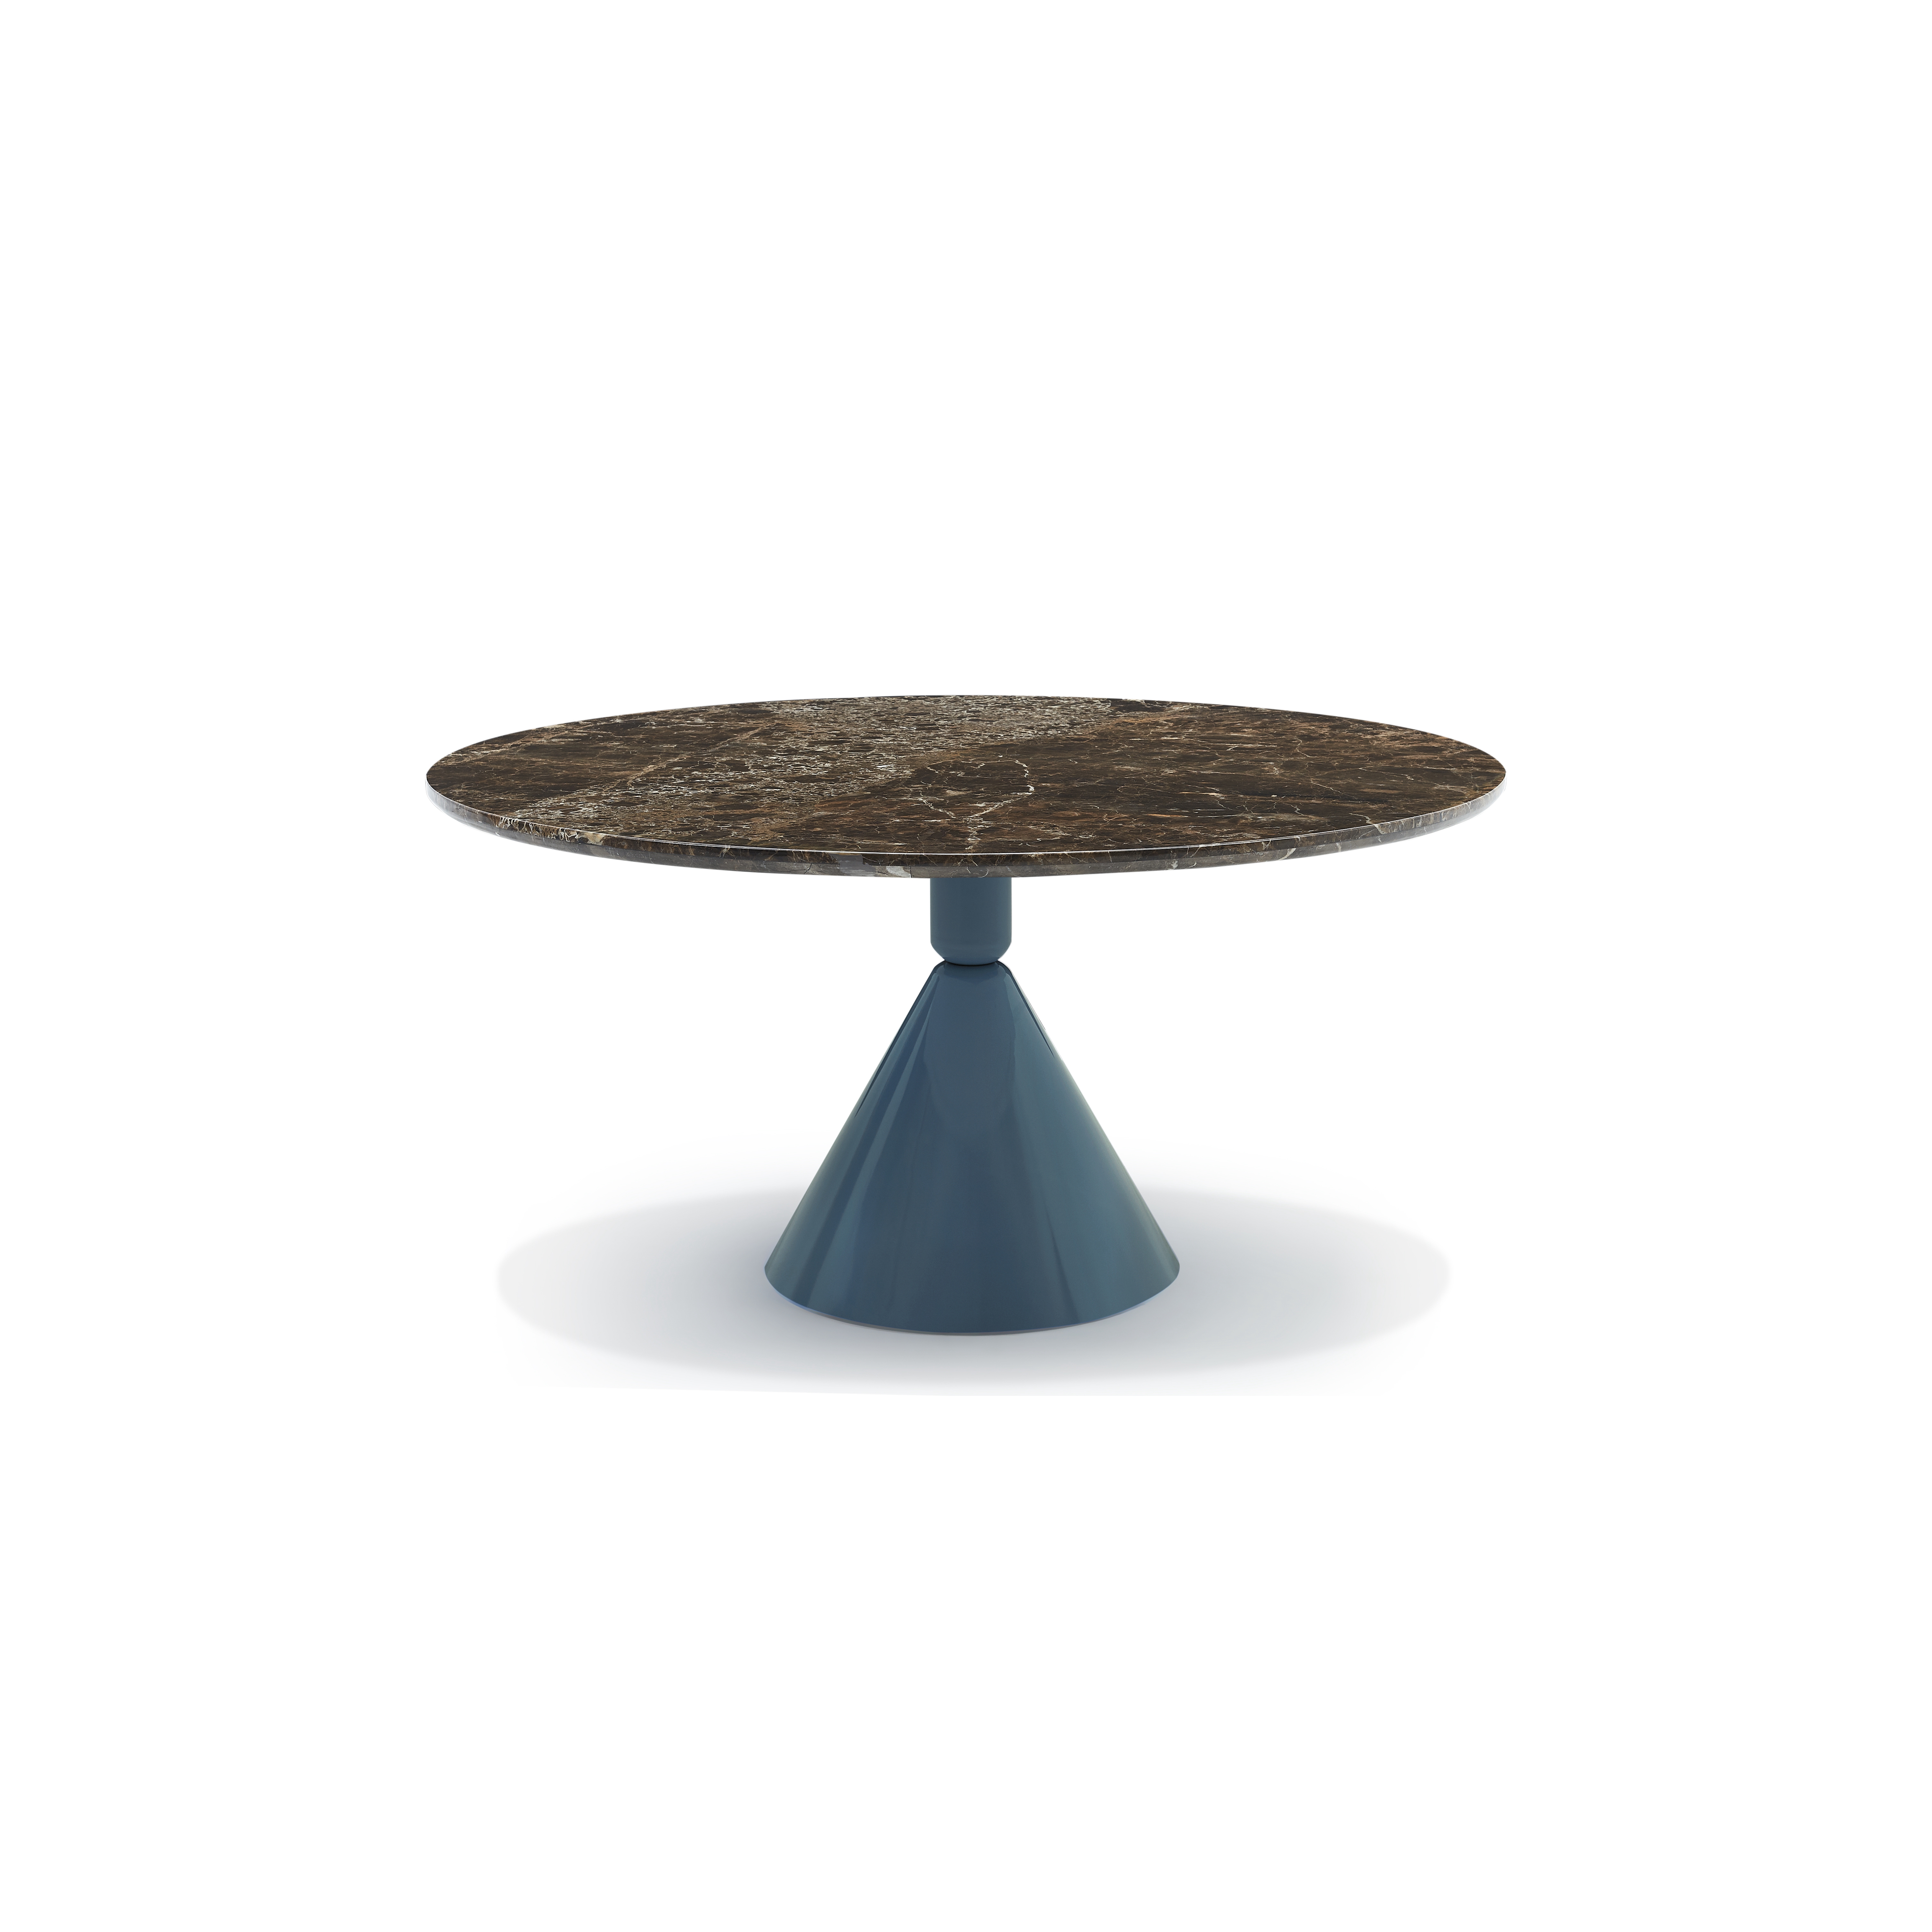 Marble top wood table, Round dining table